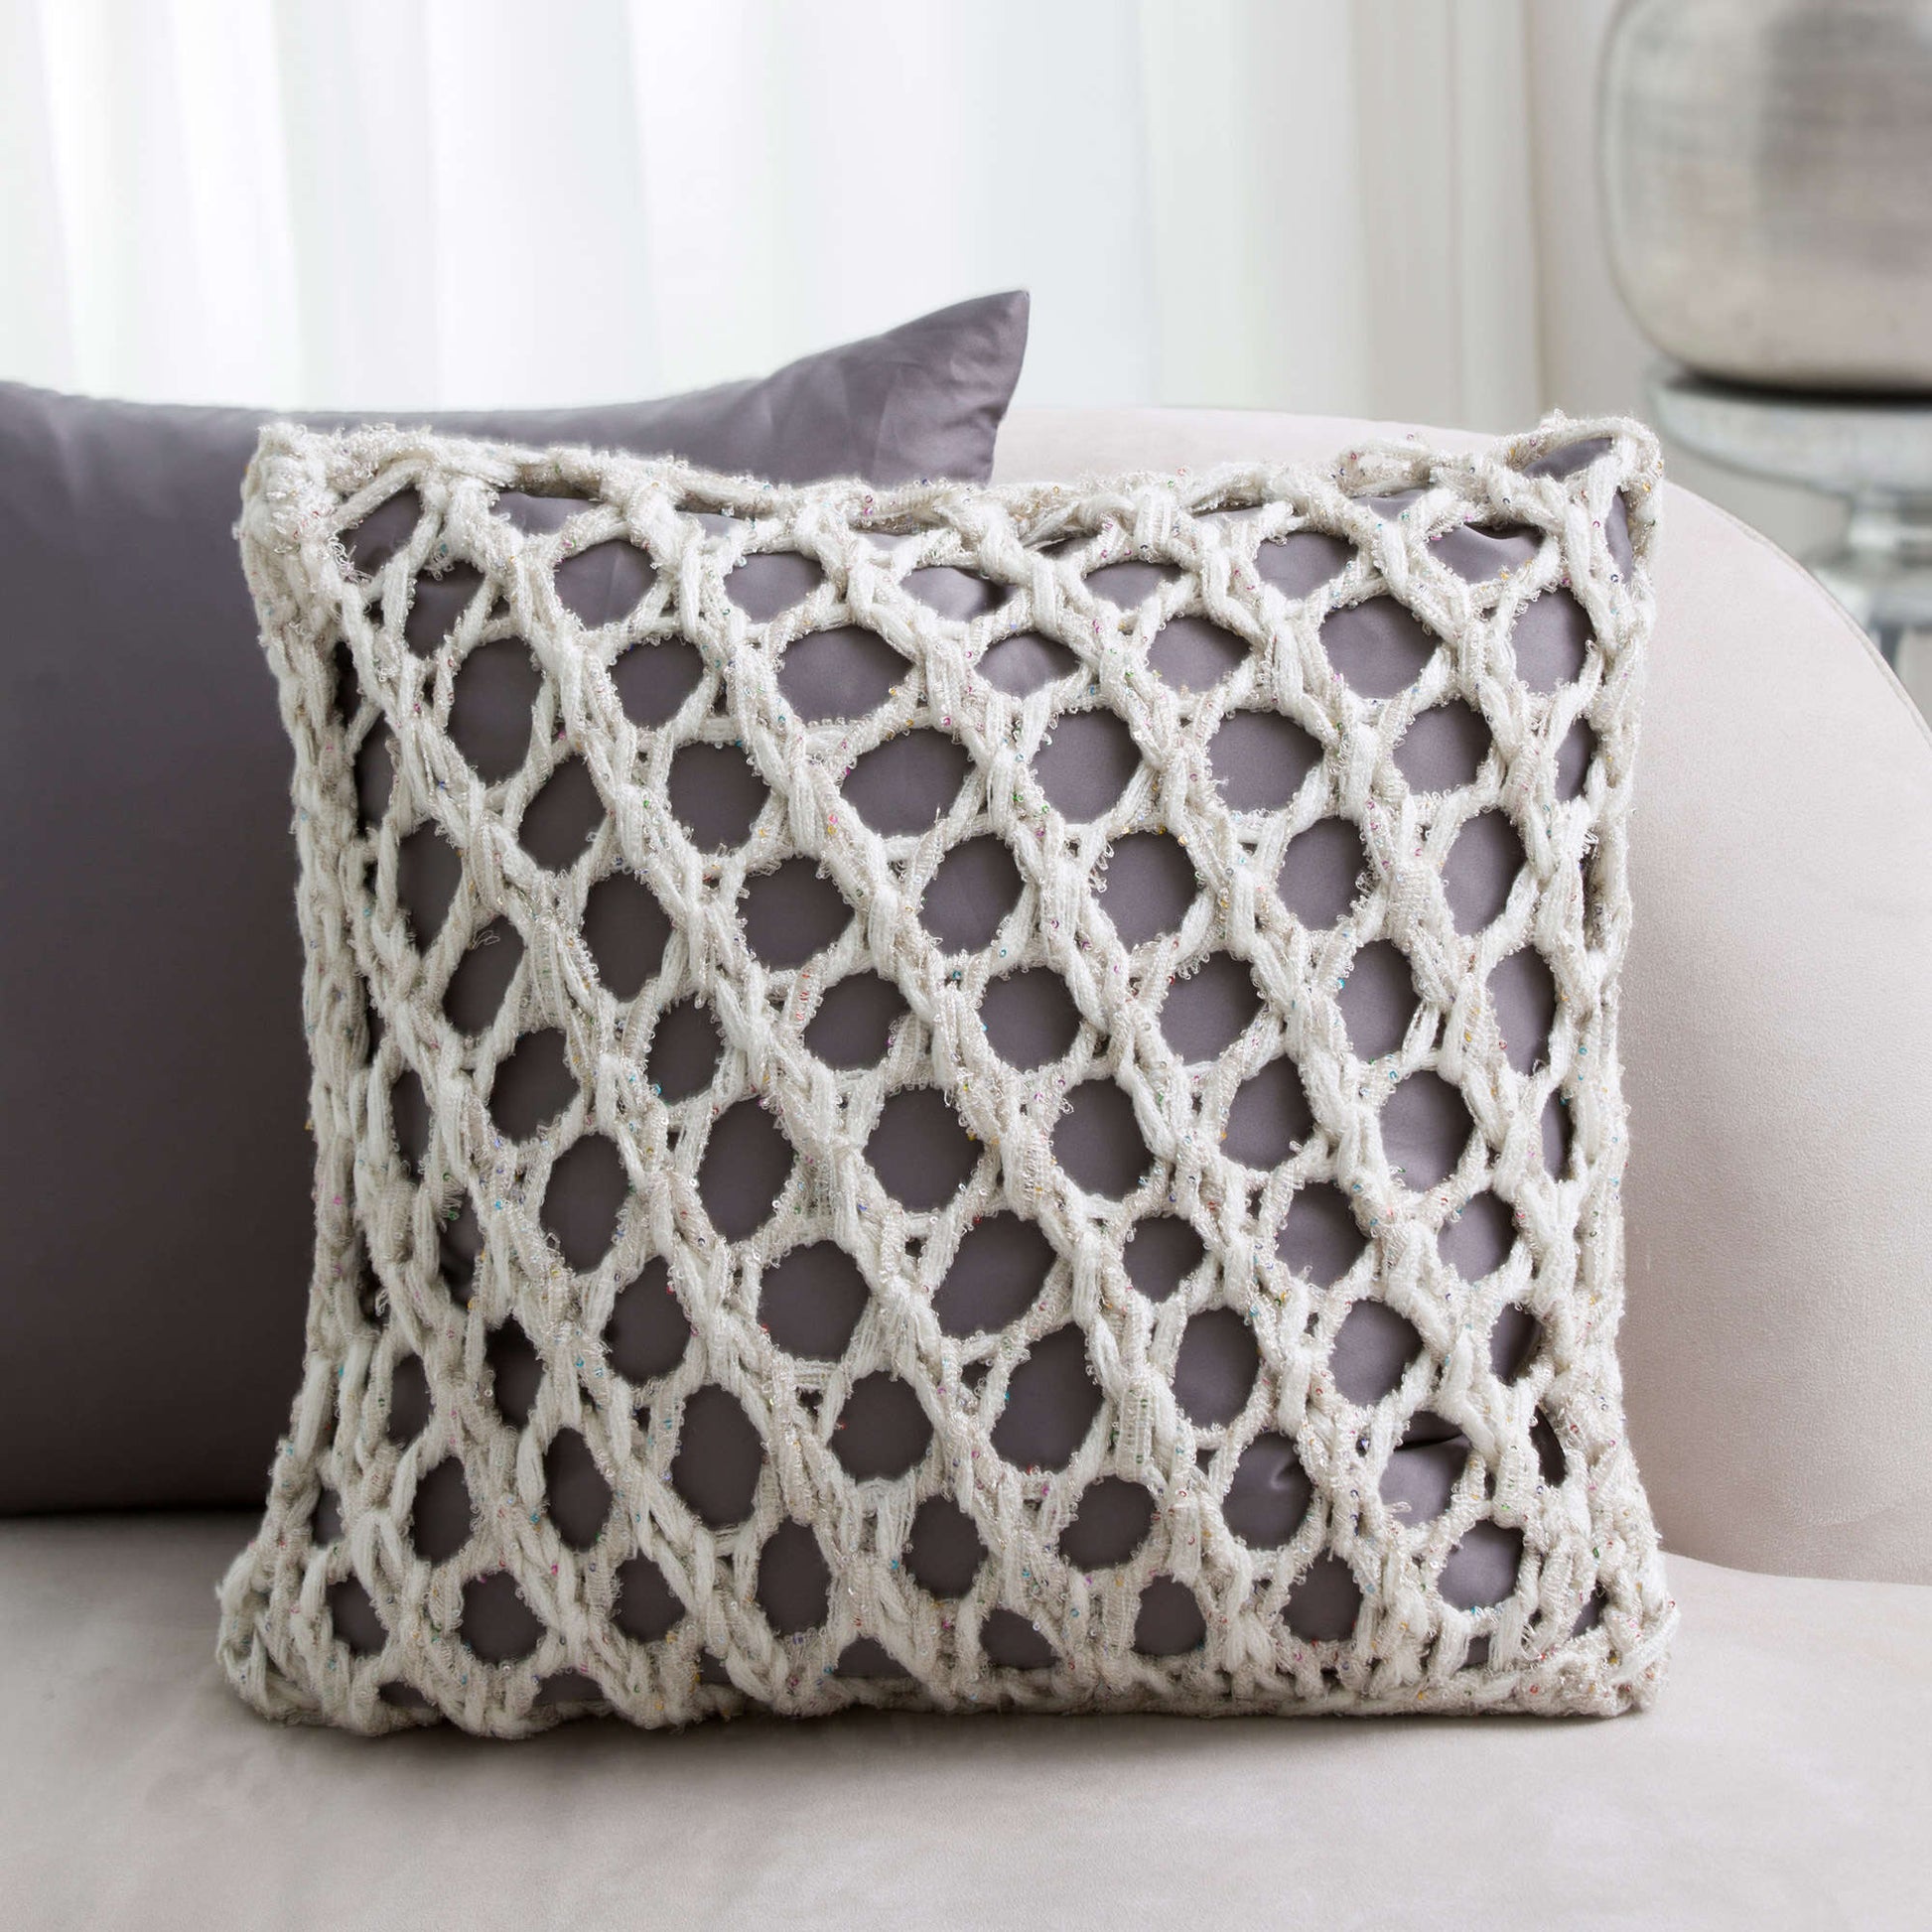 Free Red Heart Knit Mesh Pillow Cover Pattern